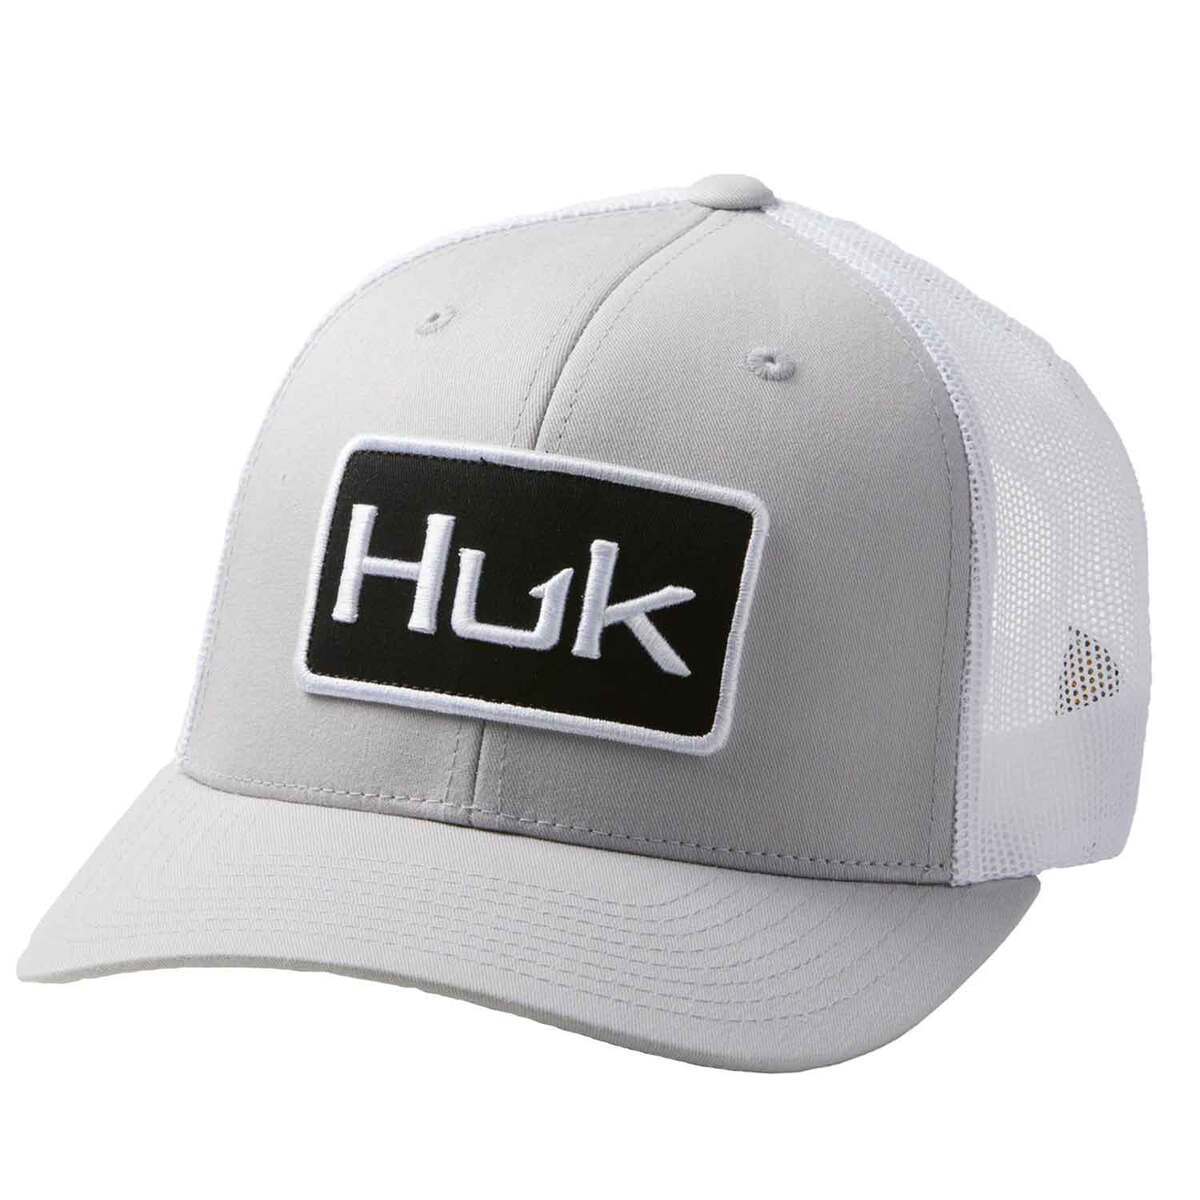 Huk Men's Solid Trucker Hat - Oyster - One Size Fits Most - Oyster One ...